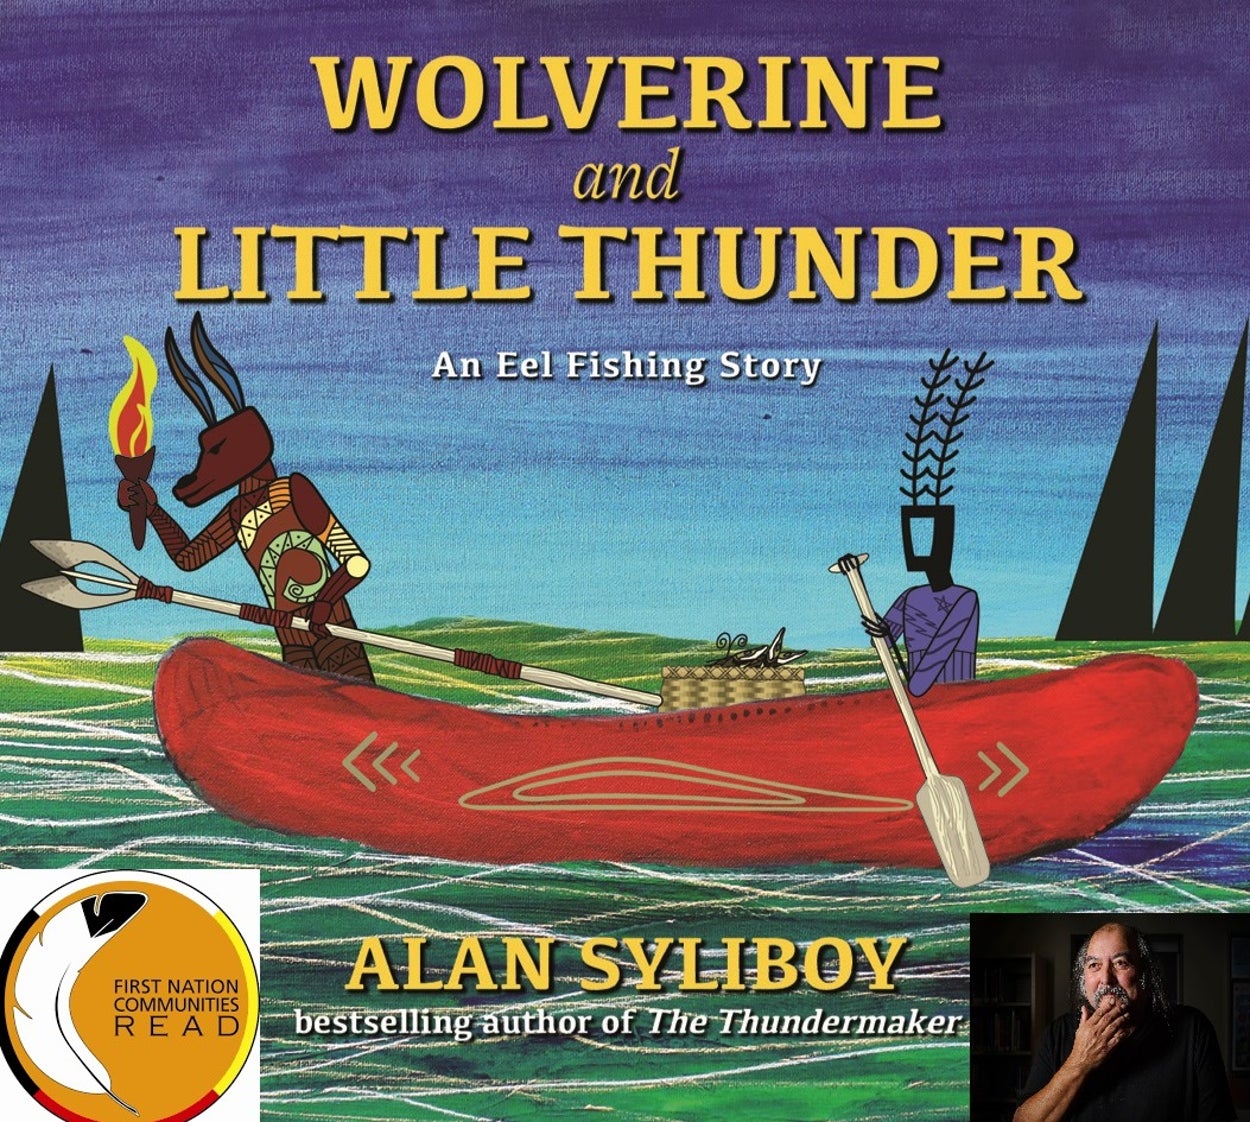 Wolverine and Little Thunder – An Eel Fishing Story – Alan Syliboy